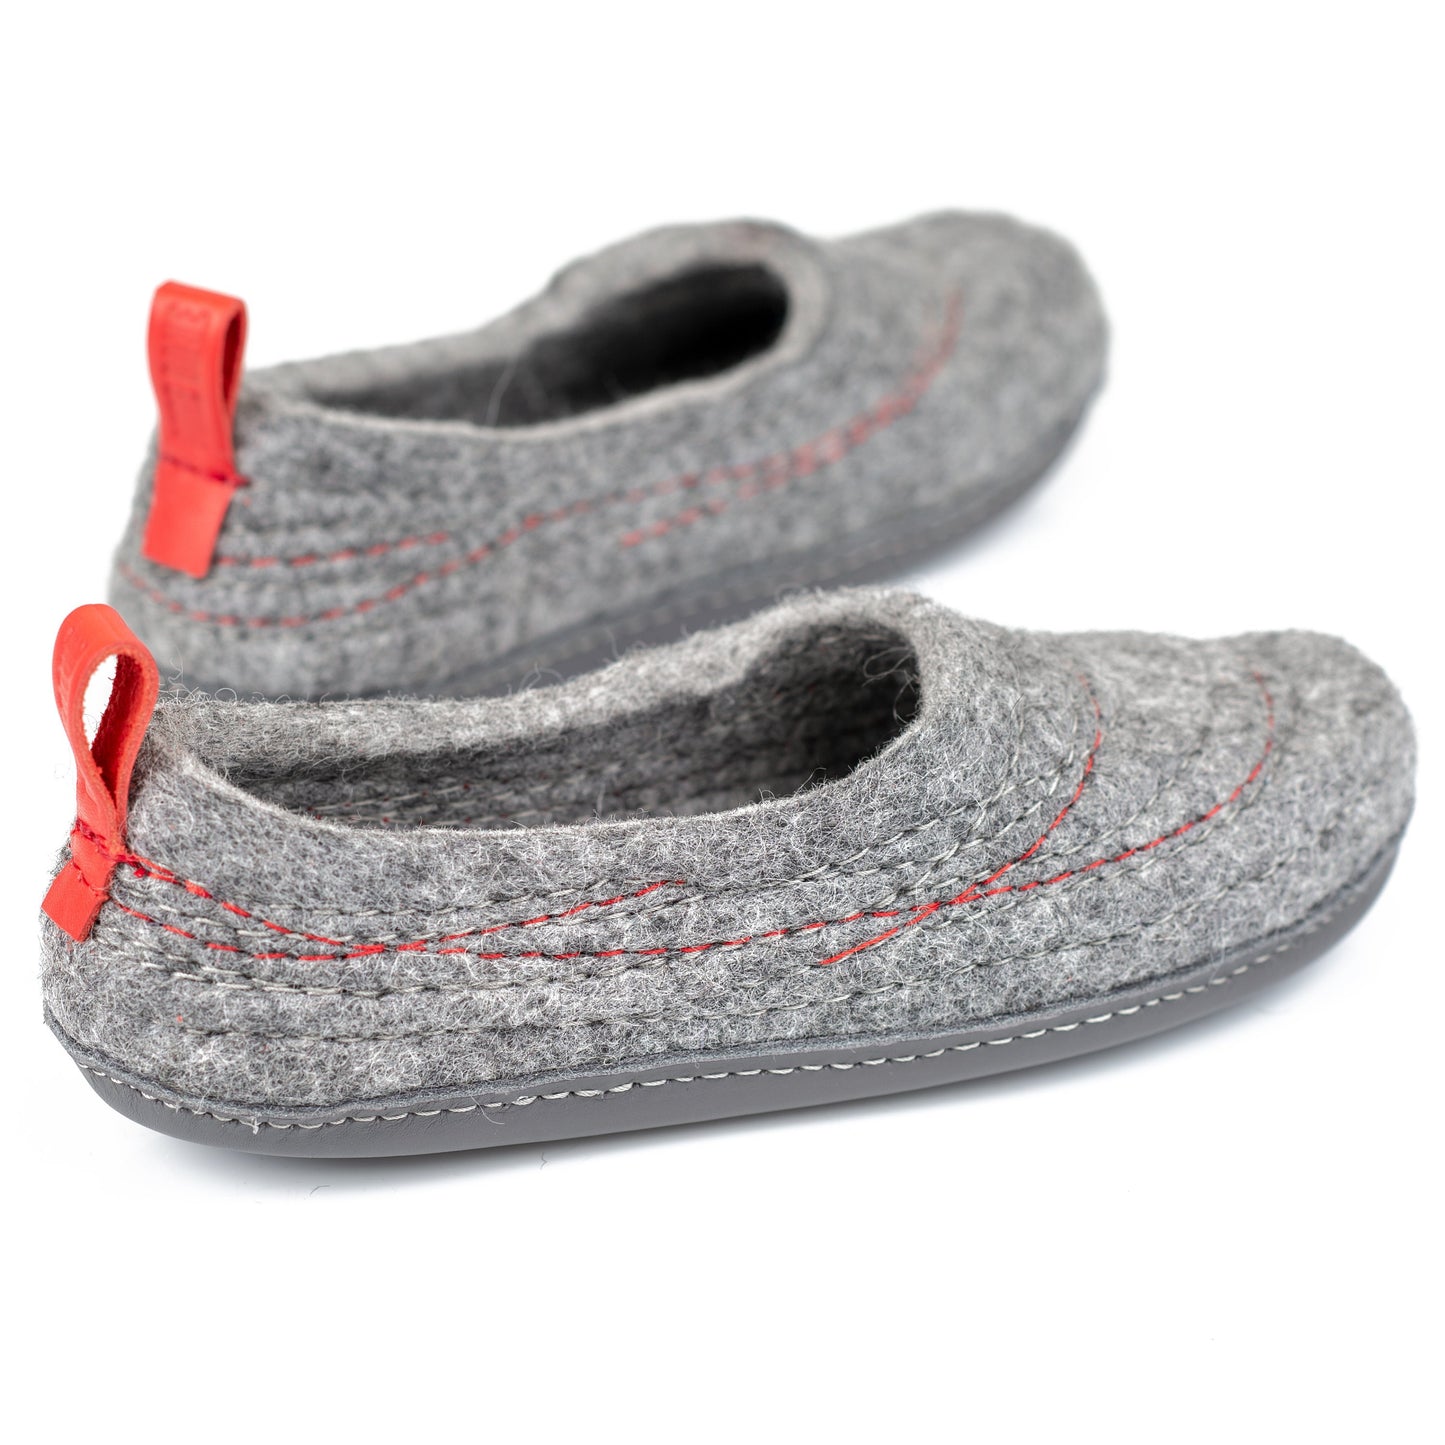 Warm Woolen Women's Slippers with Red Stitches and Hand-Stitched Gray Leather Soles